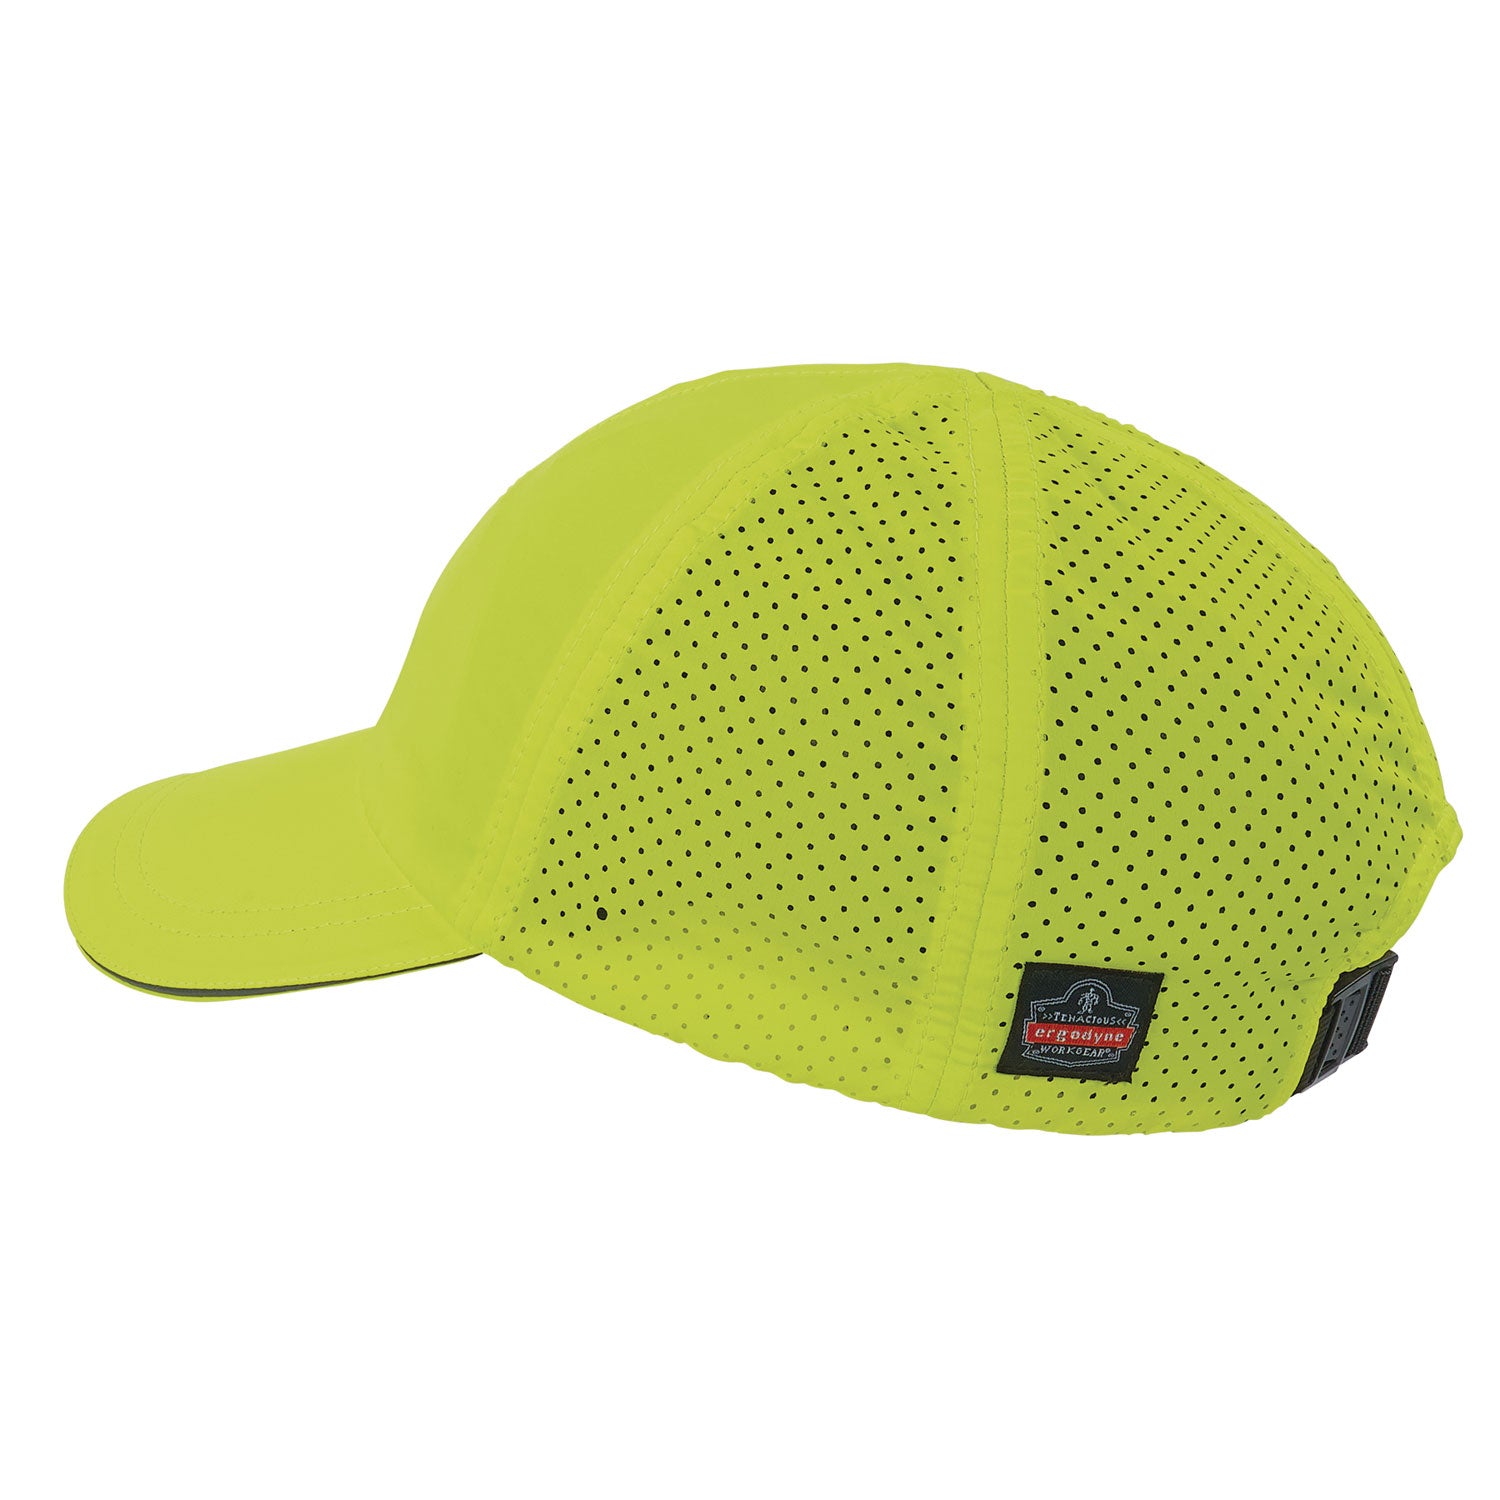 skullerz-8947-lightweight-baseball-hat-and-bump-cap-insert-x-small-small-lime-ships-in-1-3-business-days_ego23456 - 2